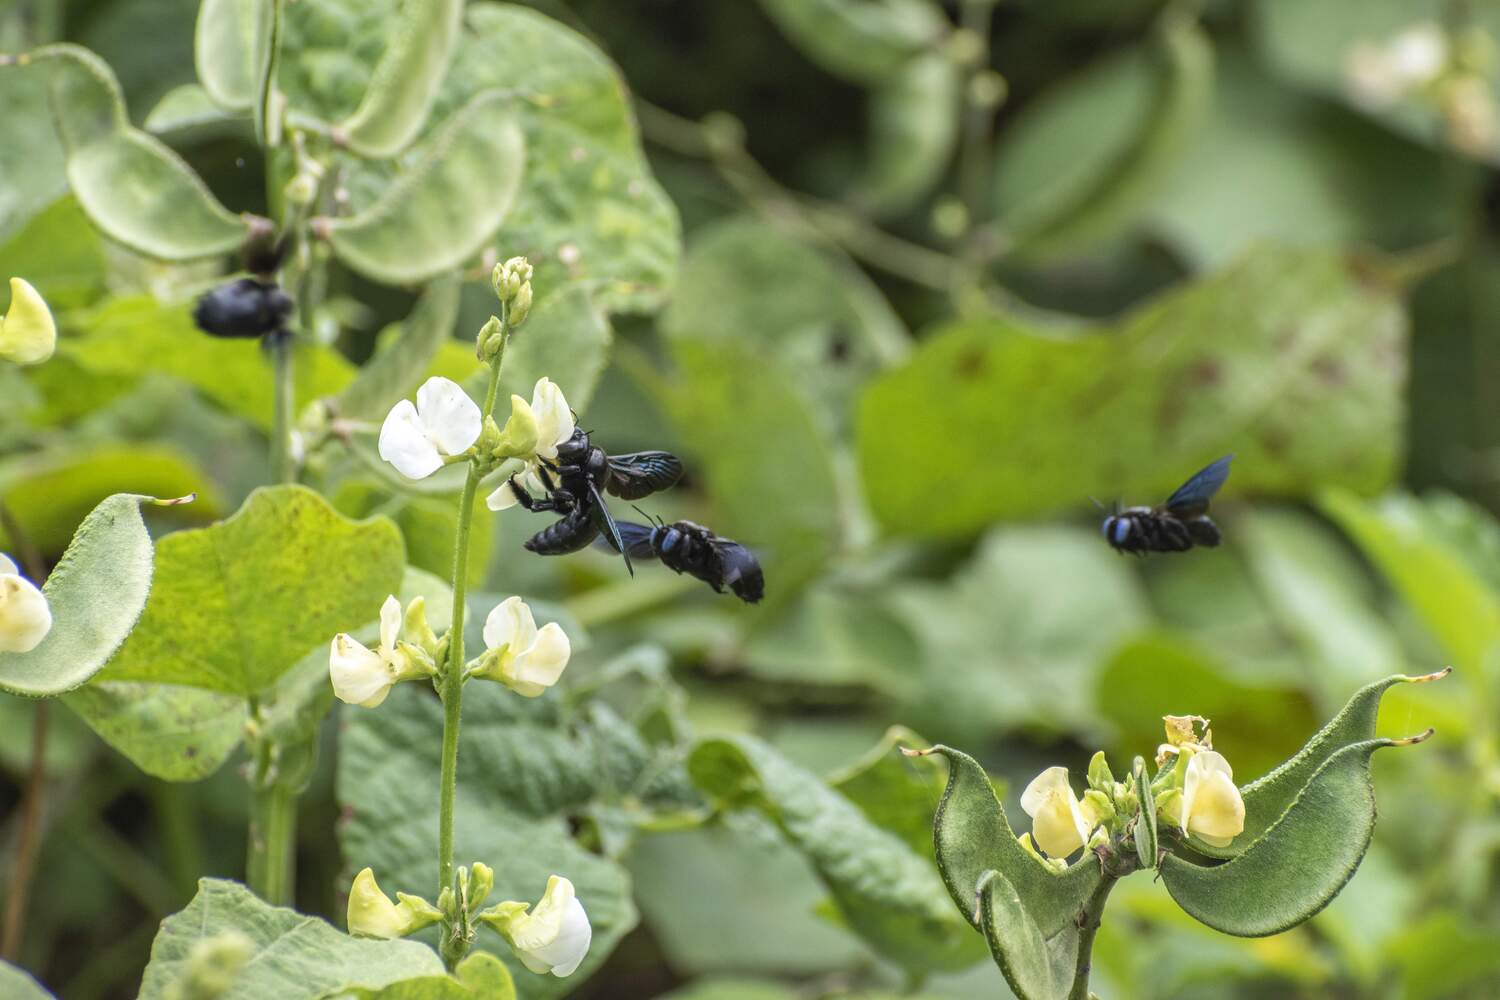 Large solitary cavity-nesting bees such as Carpenter bees (Xylocapa spp.) can benefit from urbanization provided they find enough flower resources